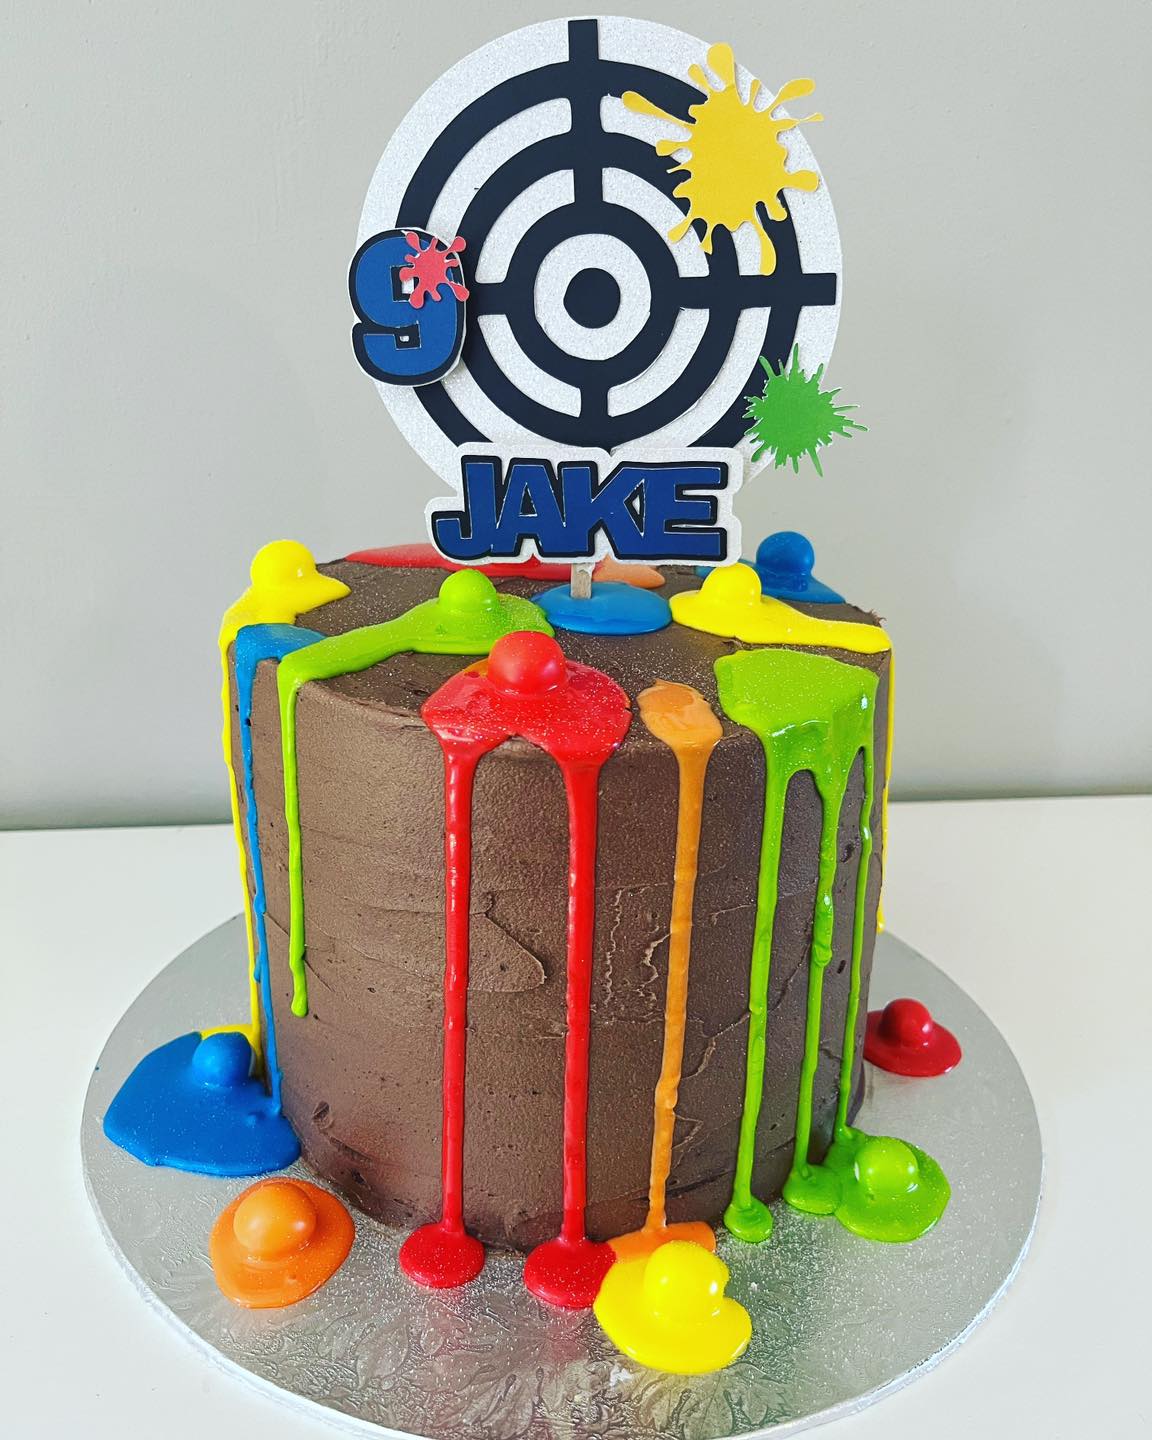 Paintball cake, cape town cakes, novelty cakes, birthday cakes, southern peninsula cakes, cake decorating cape town